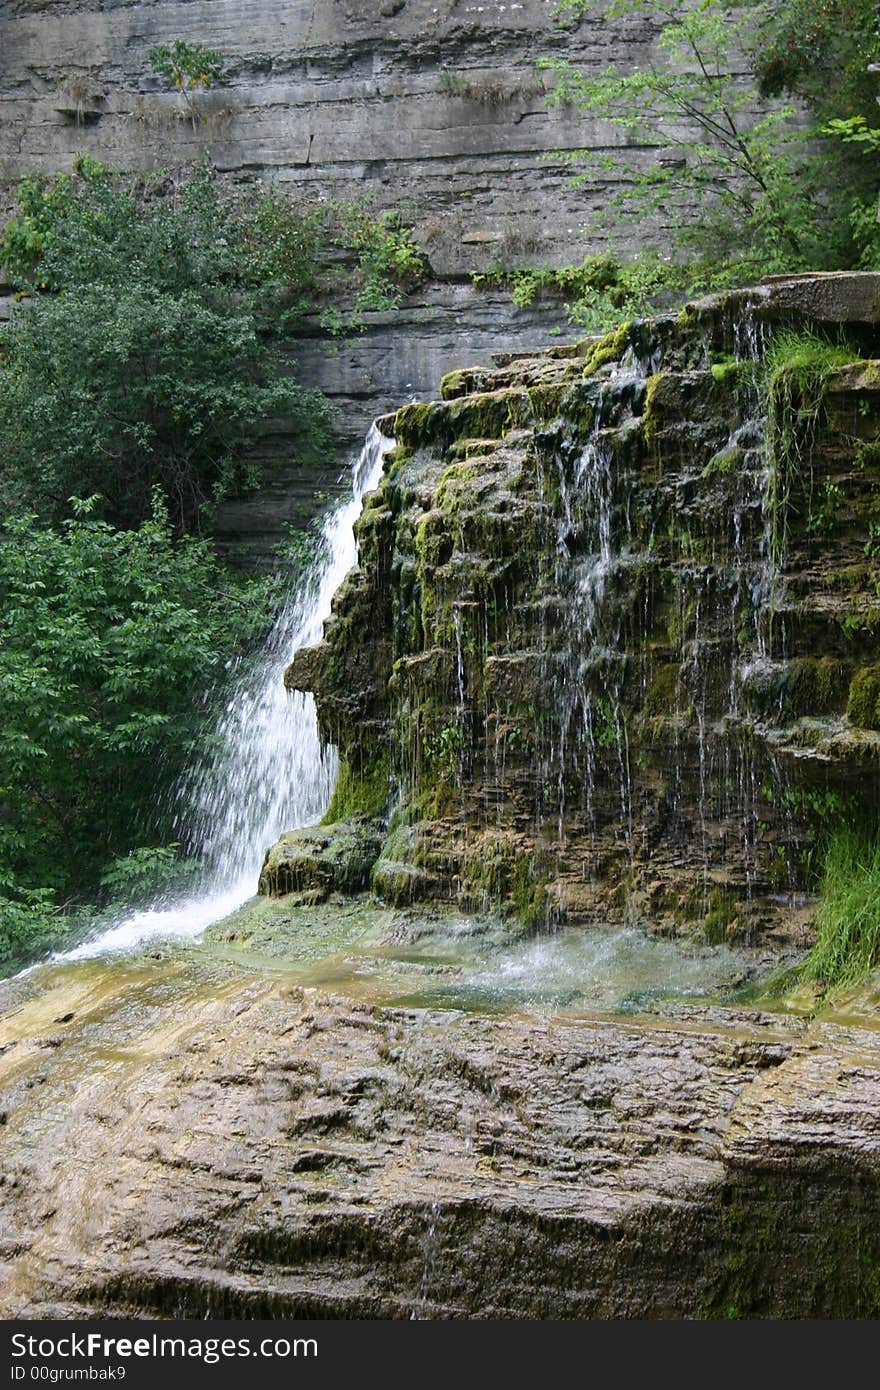 New York Waterfall near Ithica, beautiful landscape. Lush greenery adds viberant color.